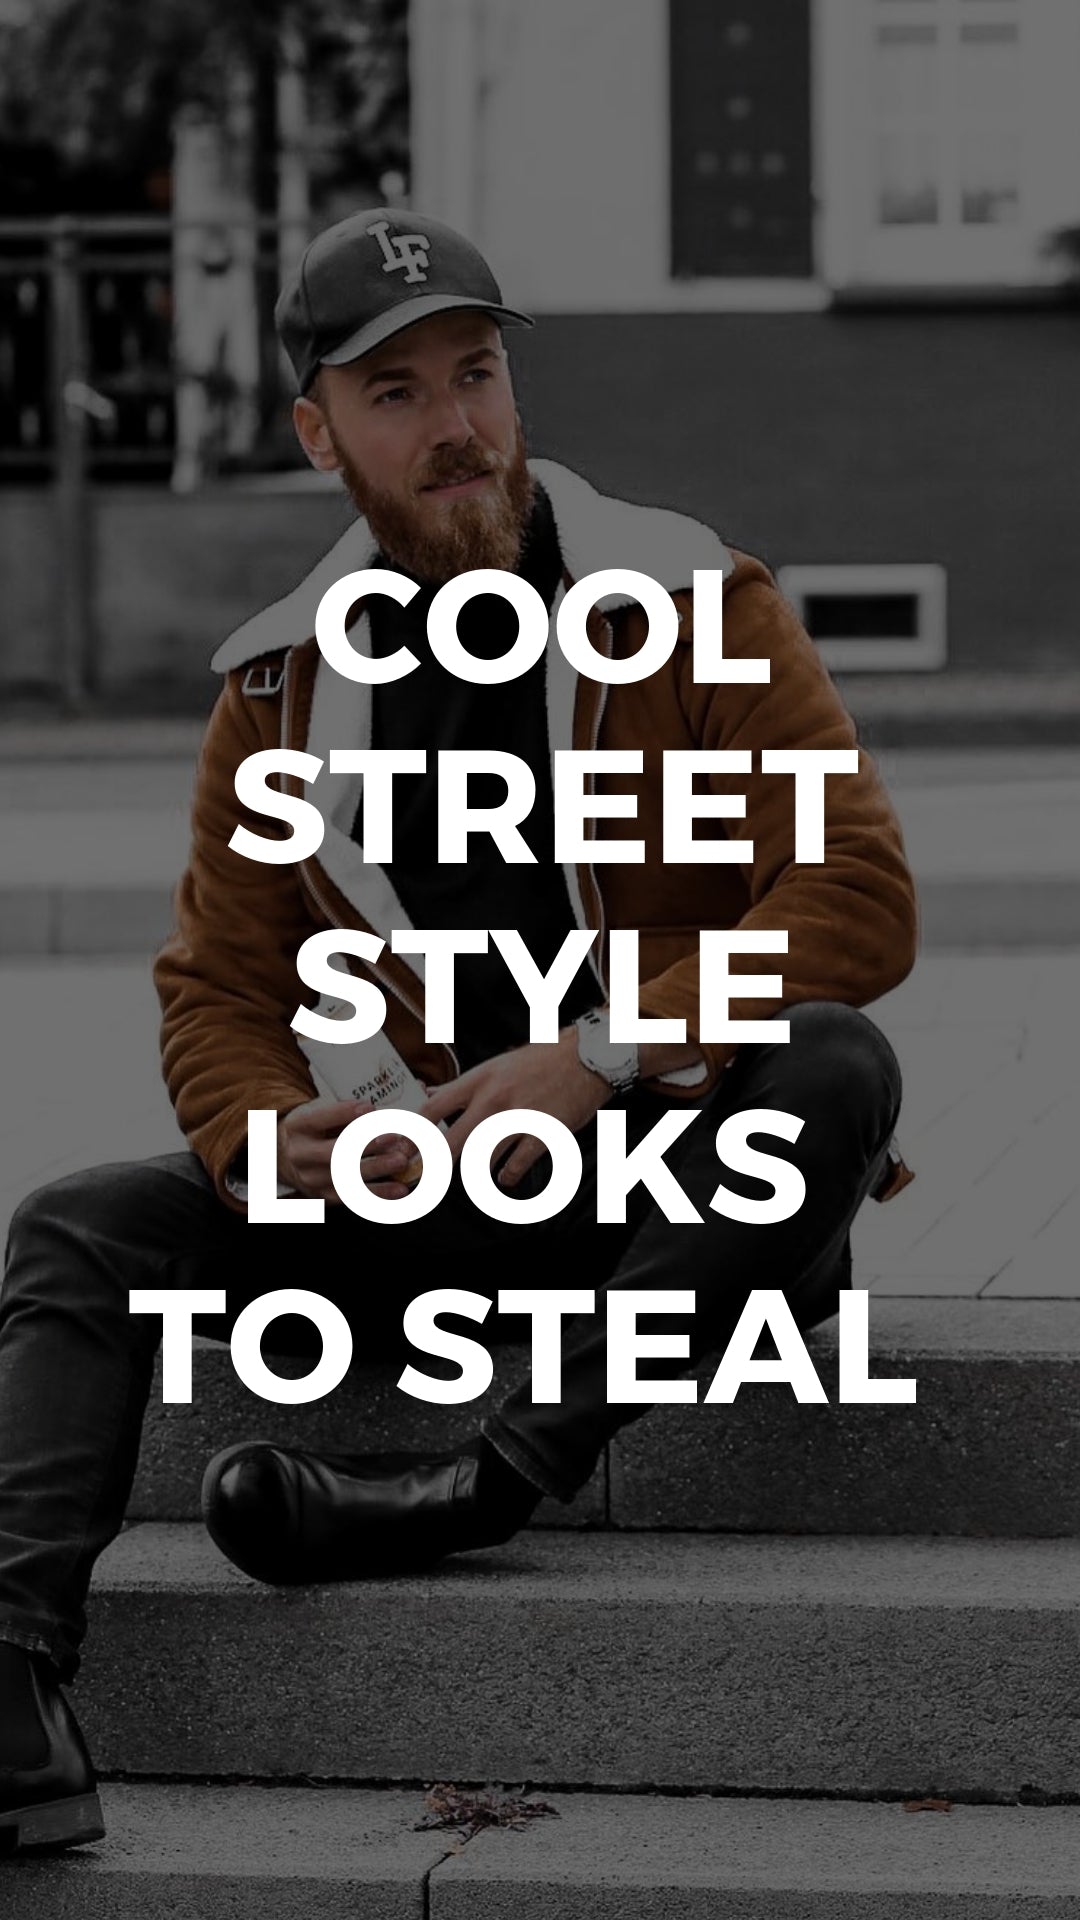 Follow me for more pins of street wear style